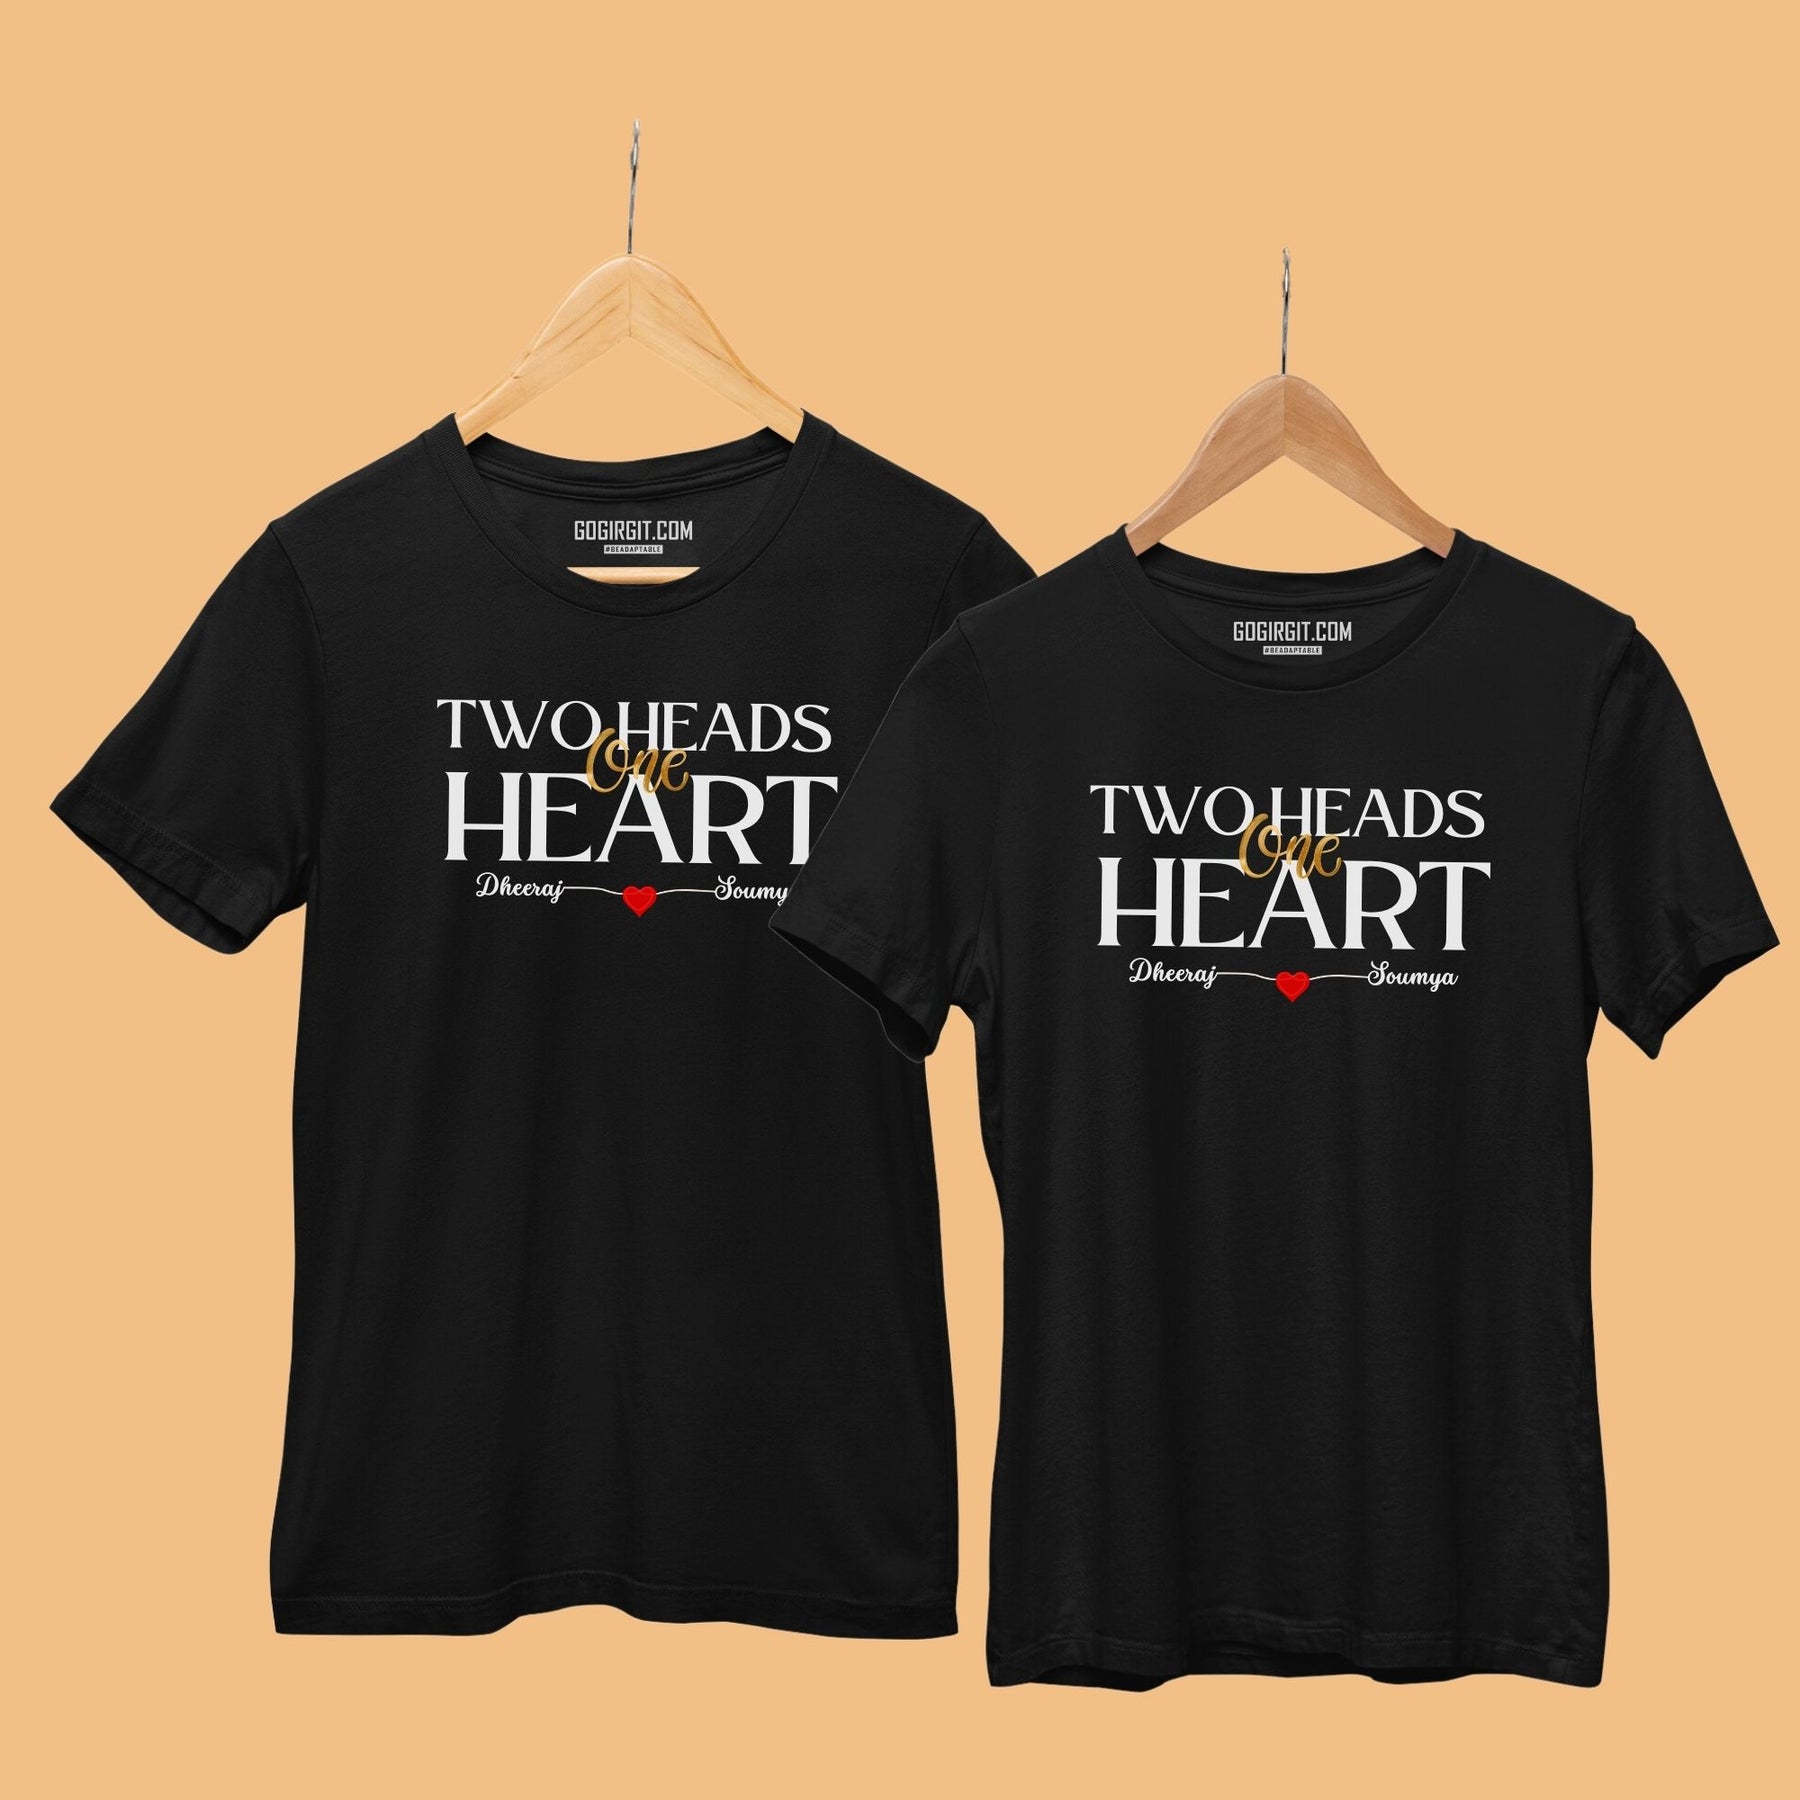 personalized-two-heads-one-heart-black-cotton-couple-tshirts-hanger-gogirgit-compersonalized-two-heads-one-heart-black-cotton-couple-tshirts-gogirgit-com